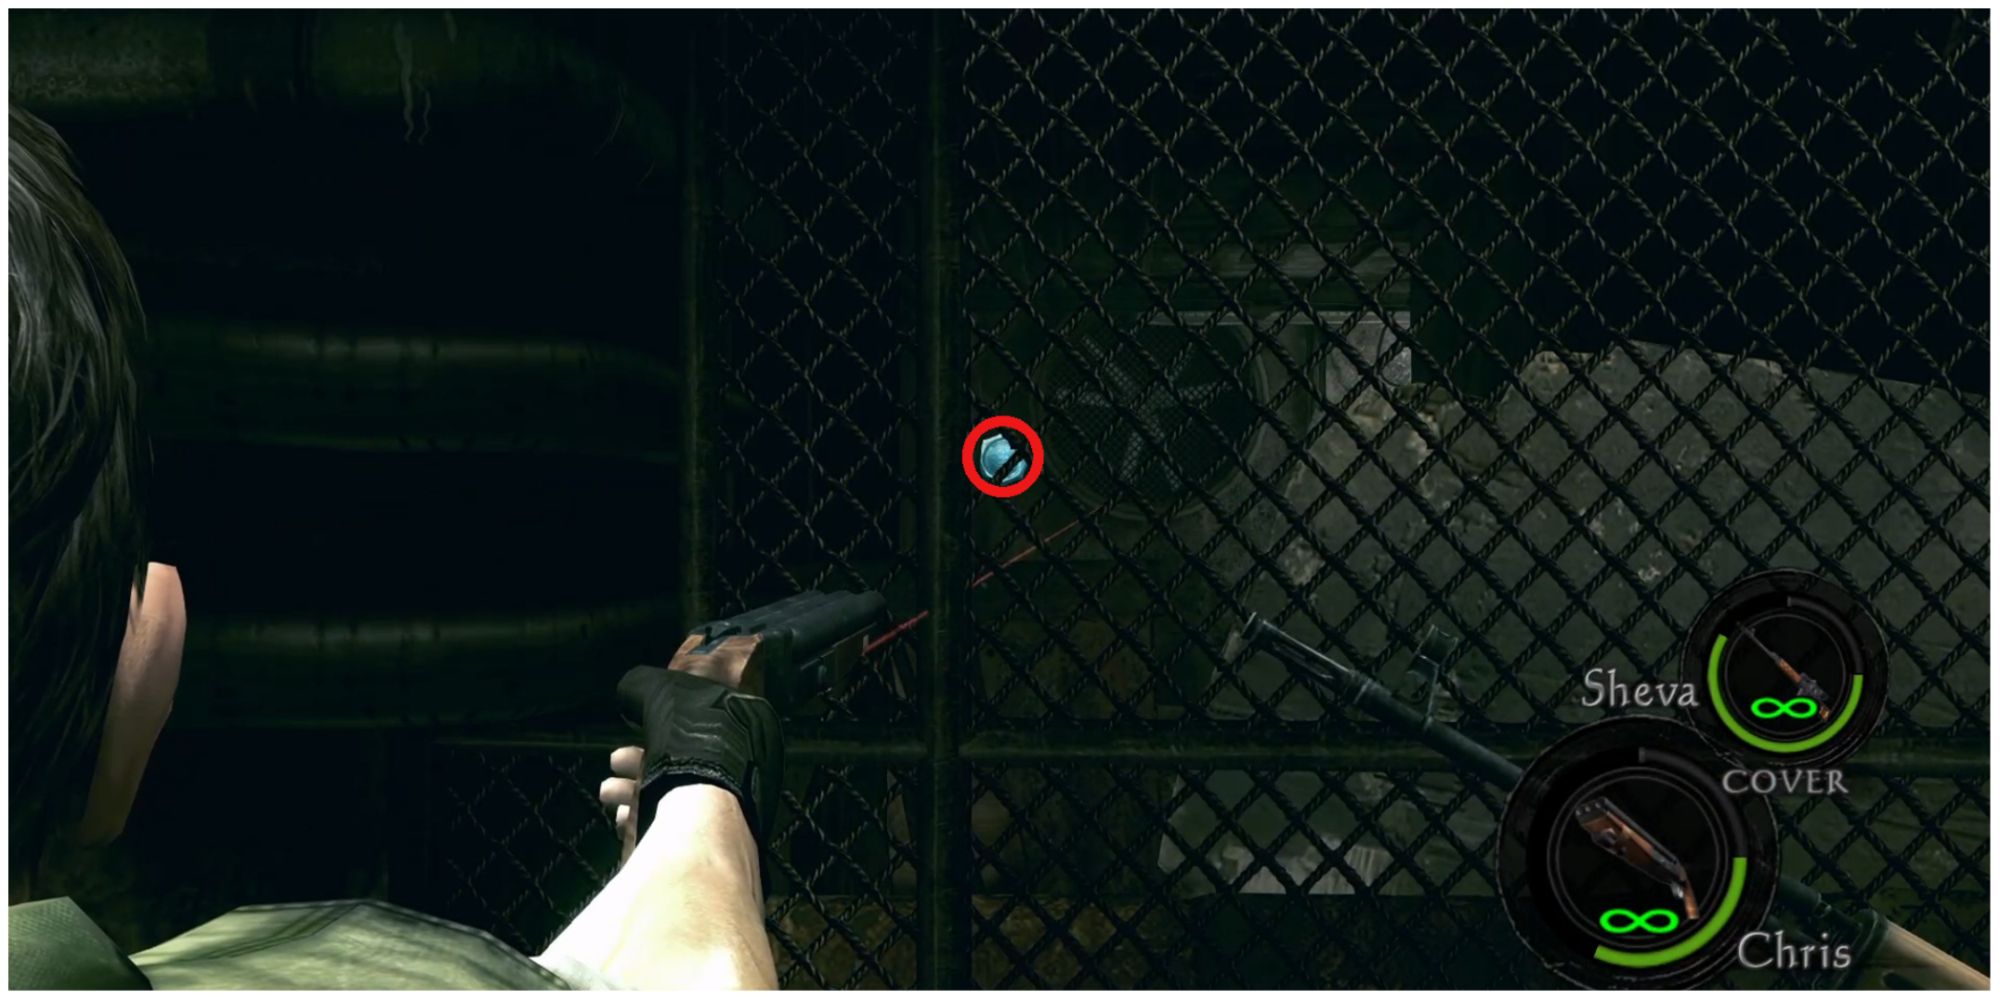 Resident Evil 5 chapter 1-2 emblem 3 behind a wire fence